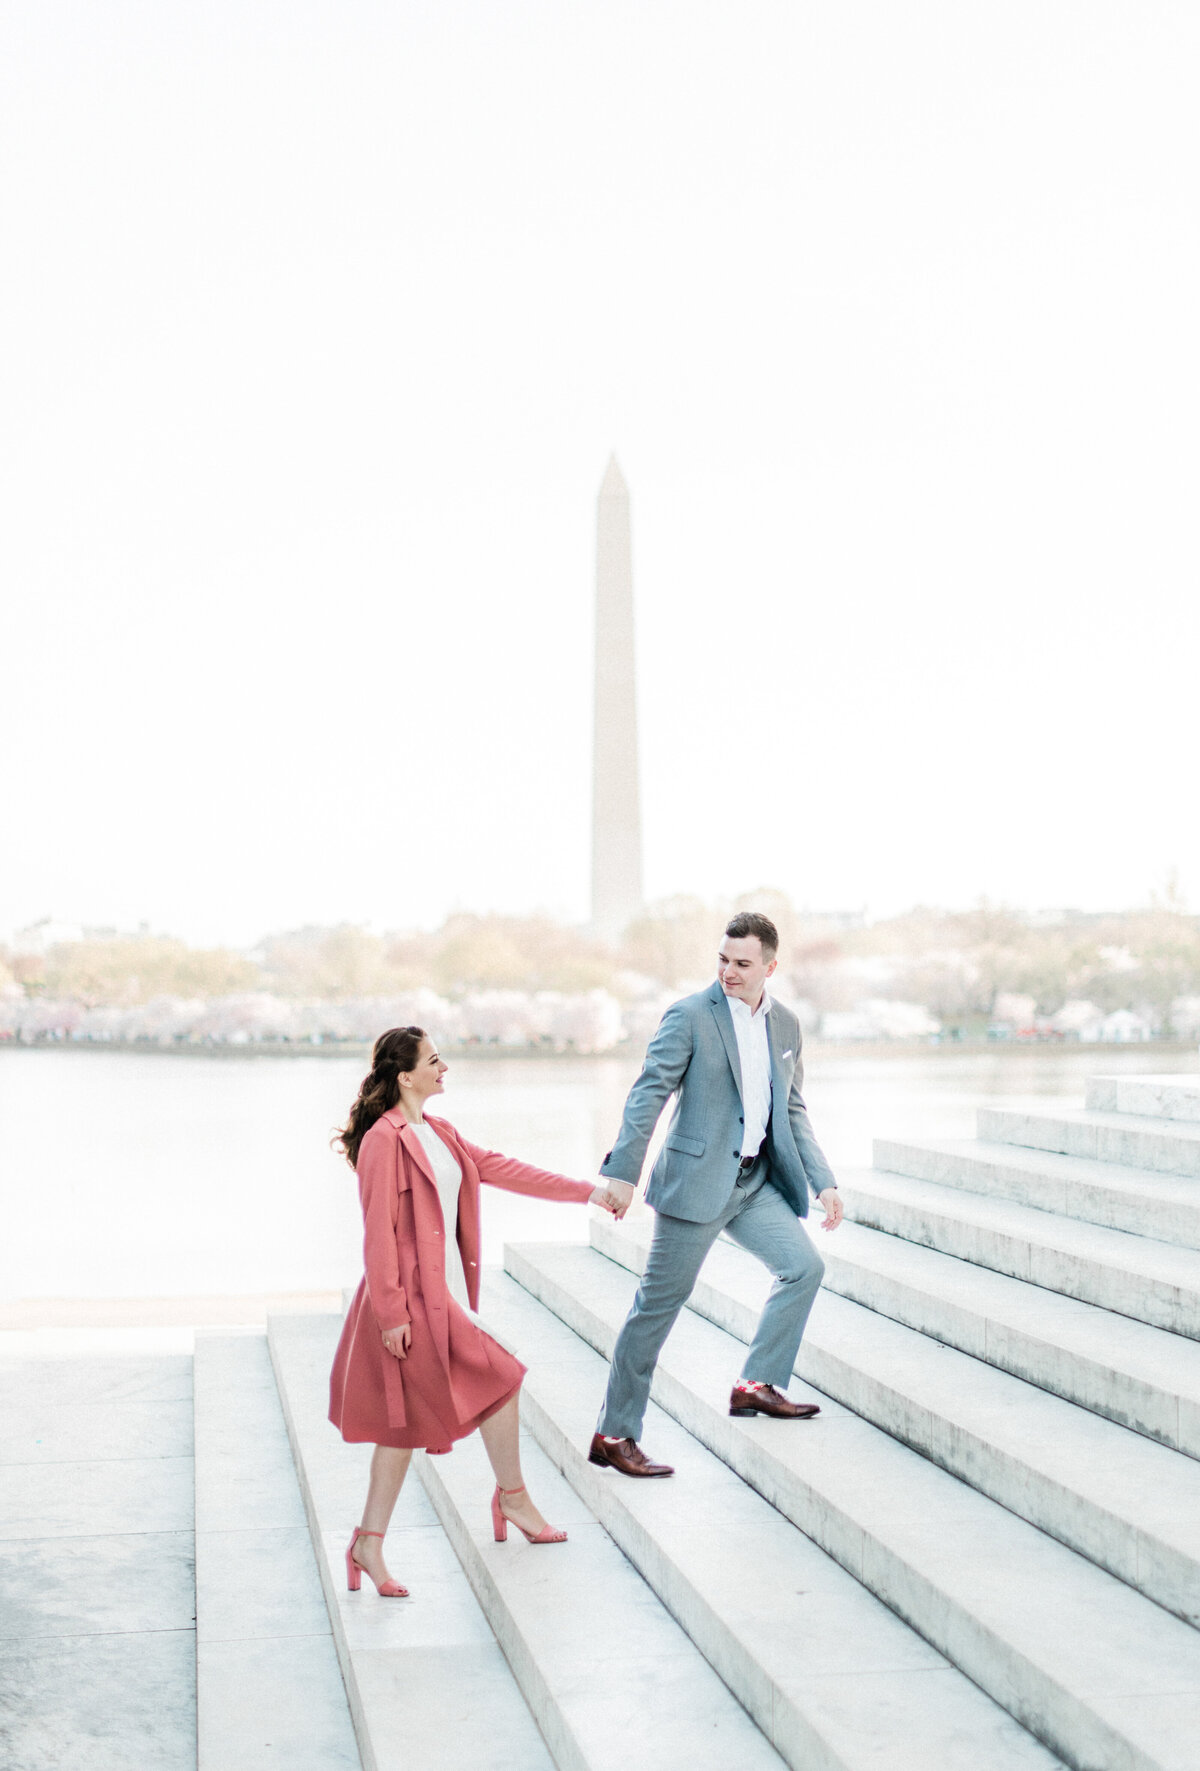 Suzanne and Austin Cherry Blossom Engagements - Rachel Galluzzo Photography-8